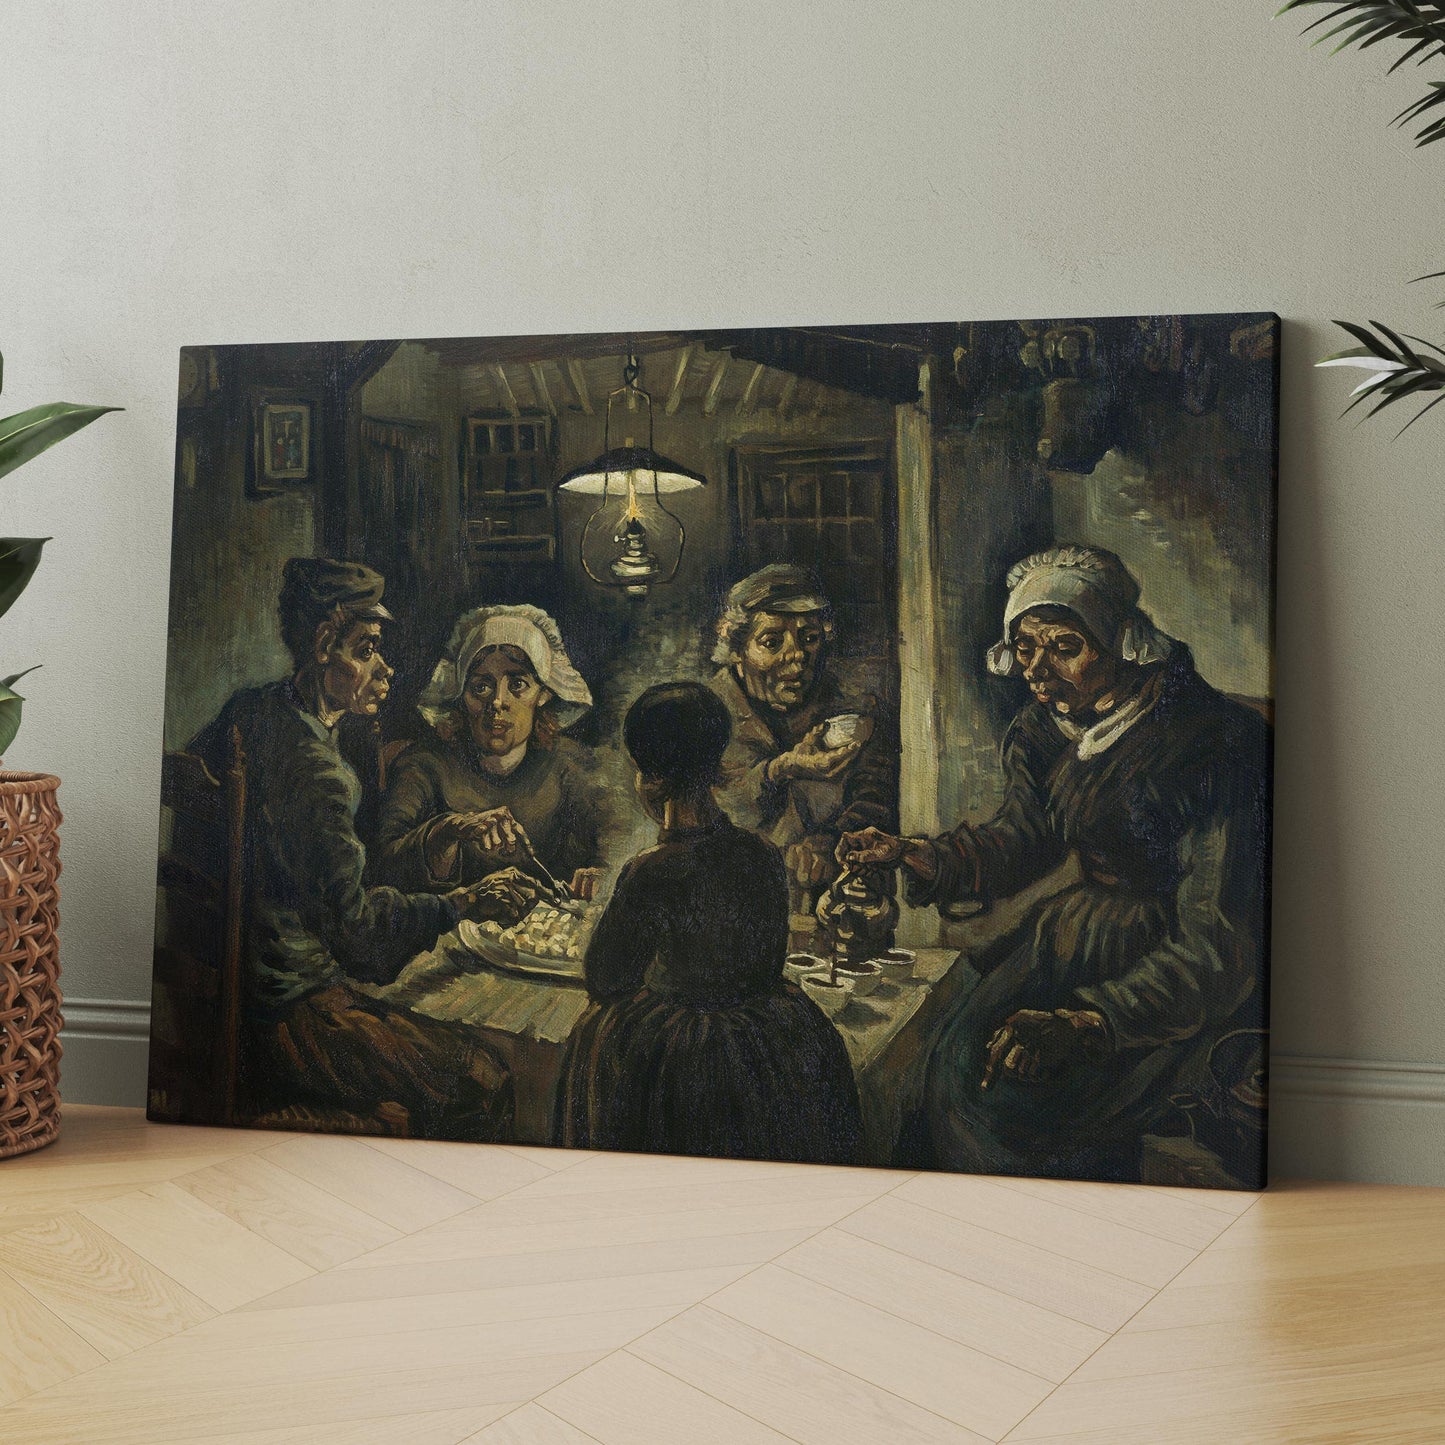 The Potato Eaters (1885) by Van Gogh